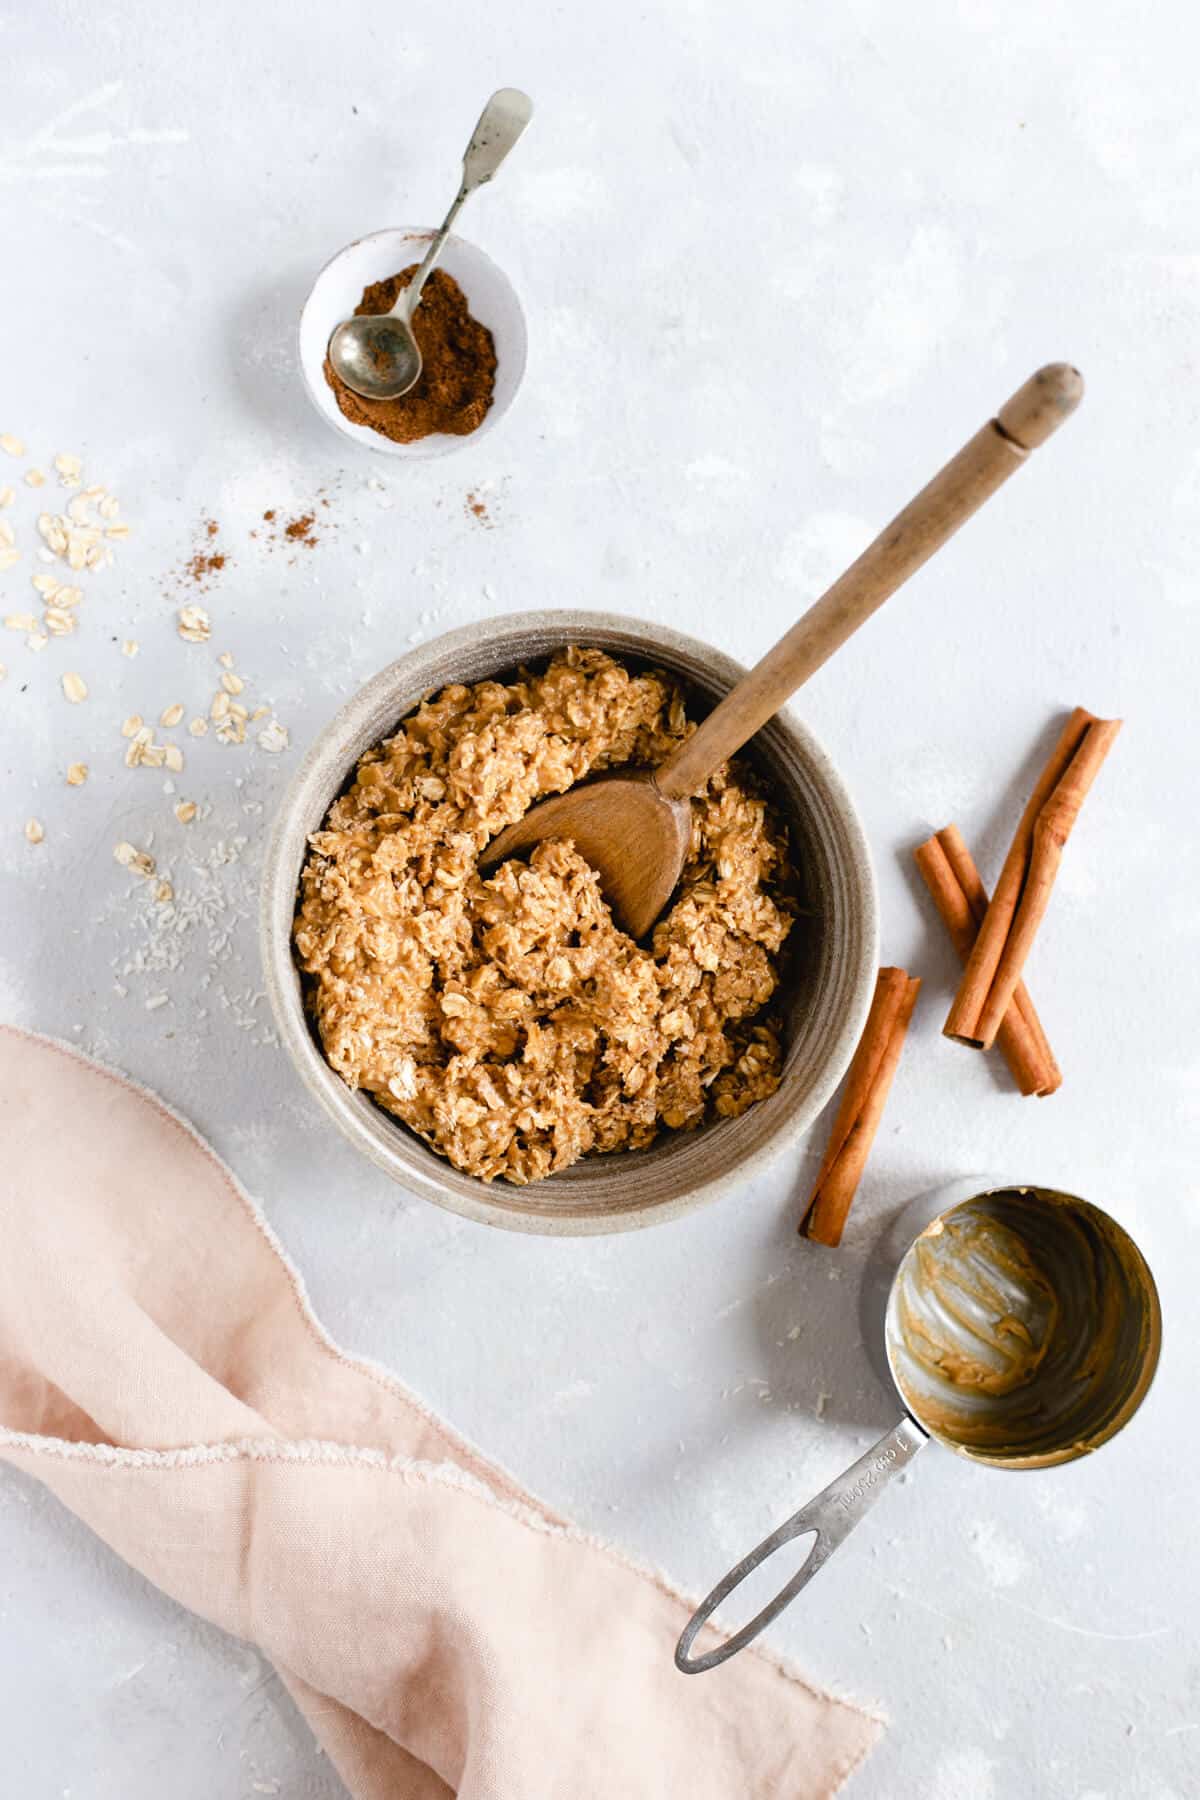 Overhead shot of bowl with oats, coconut shreds and peanut butter mixture with wooden spoon